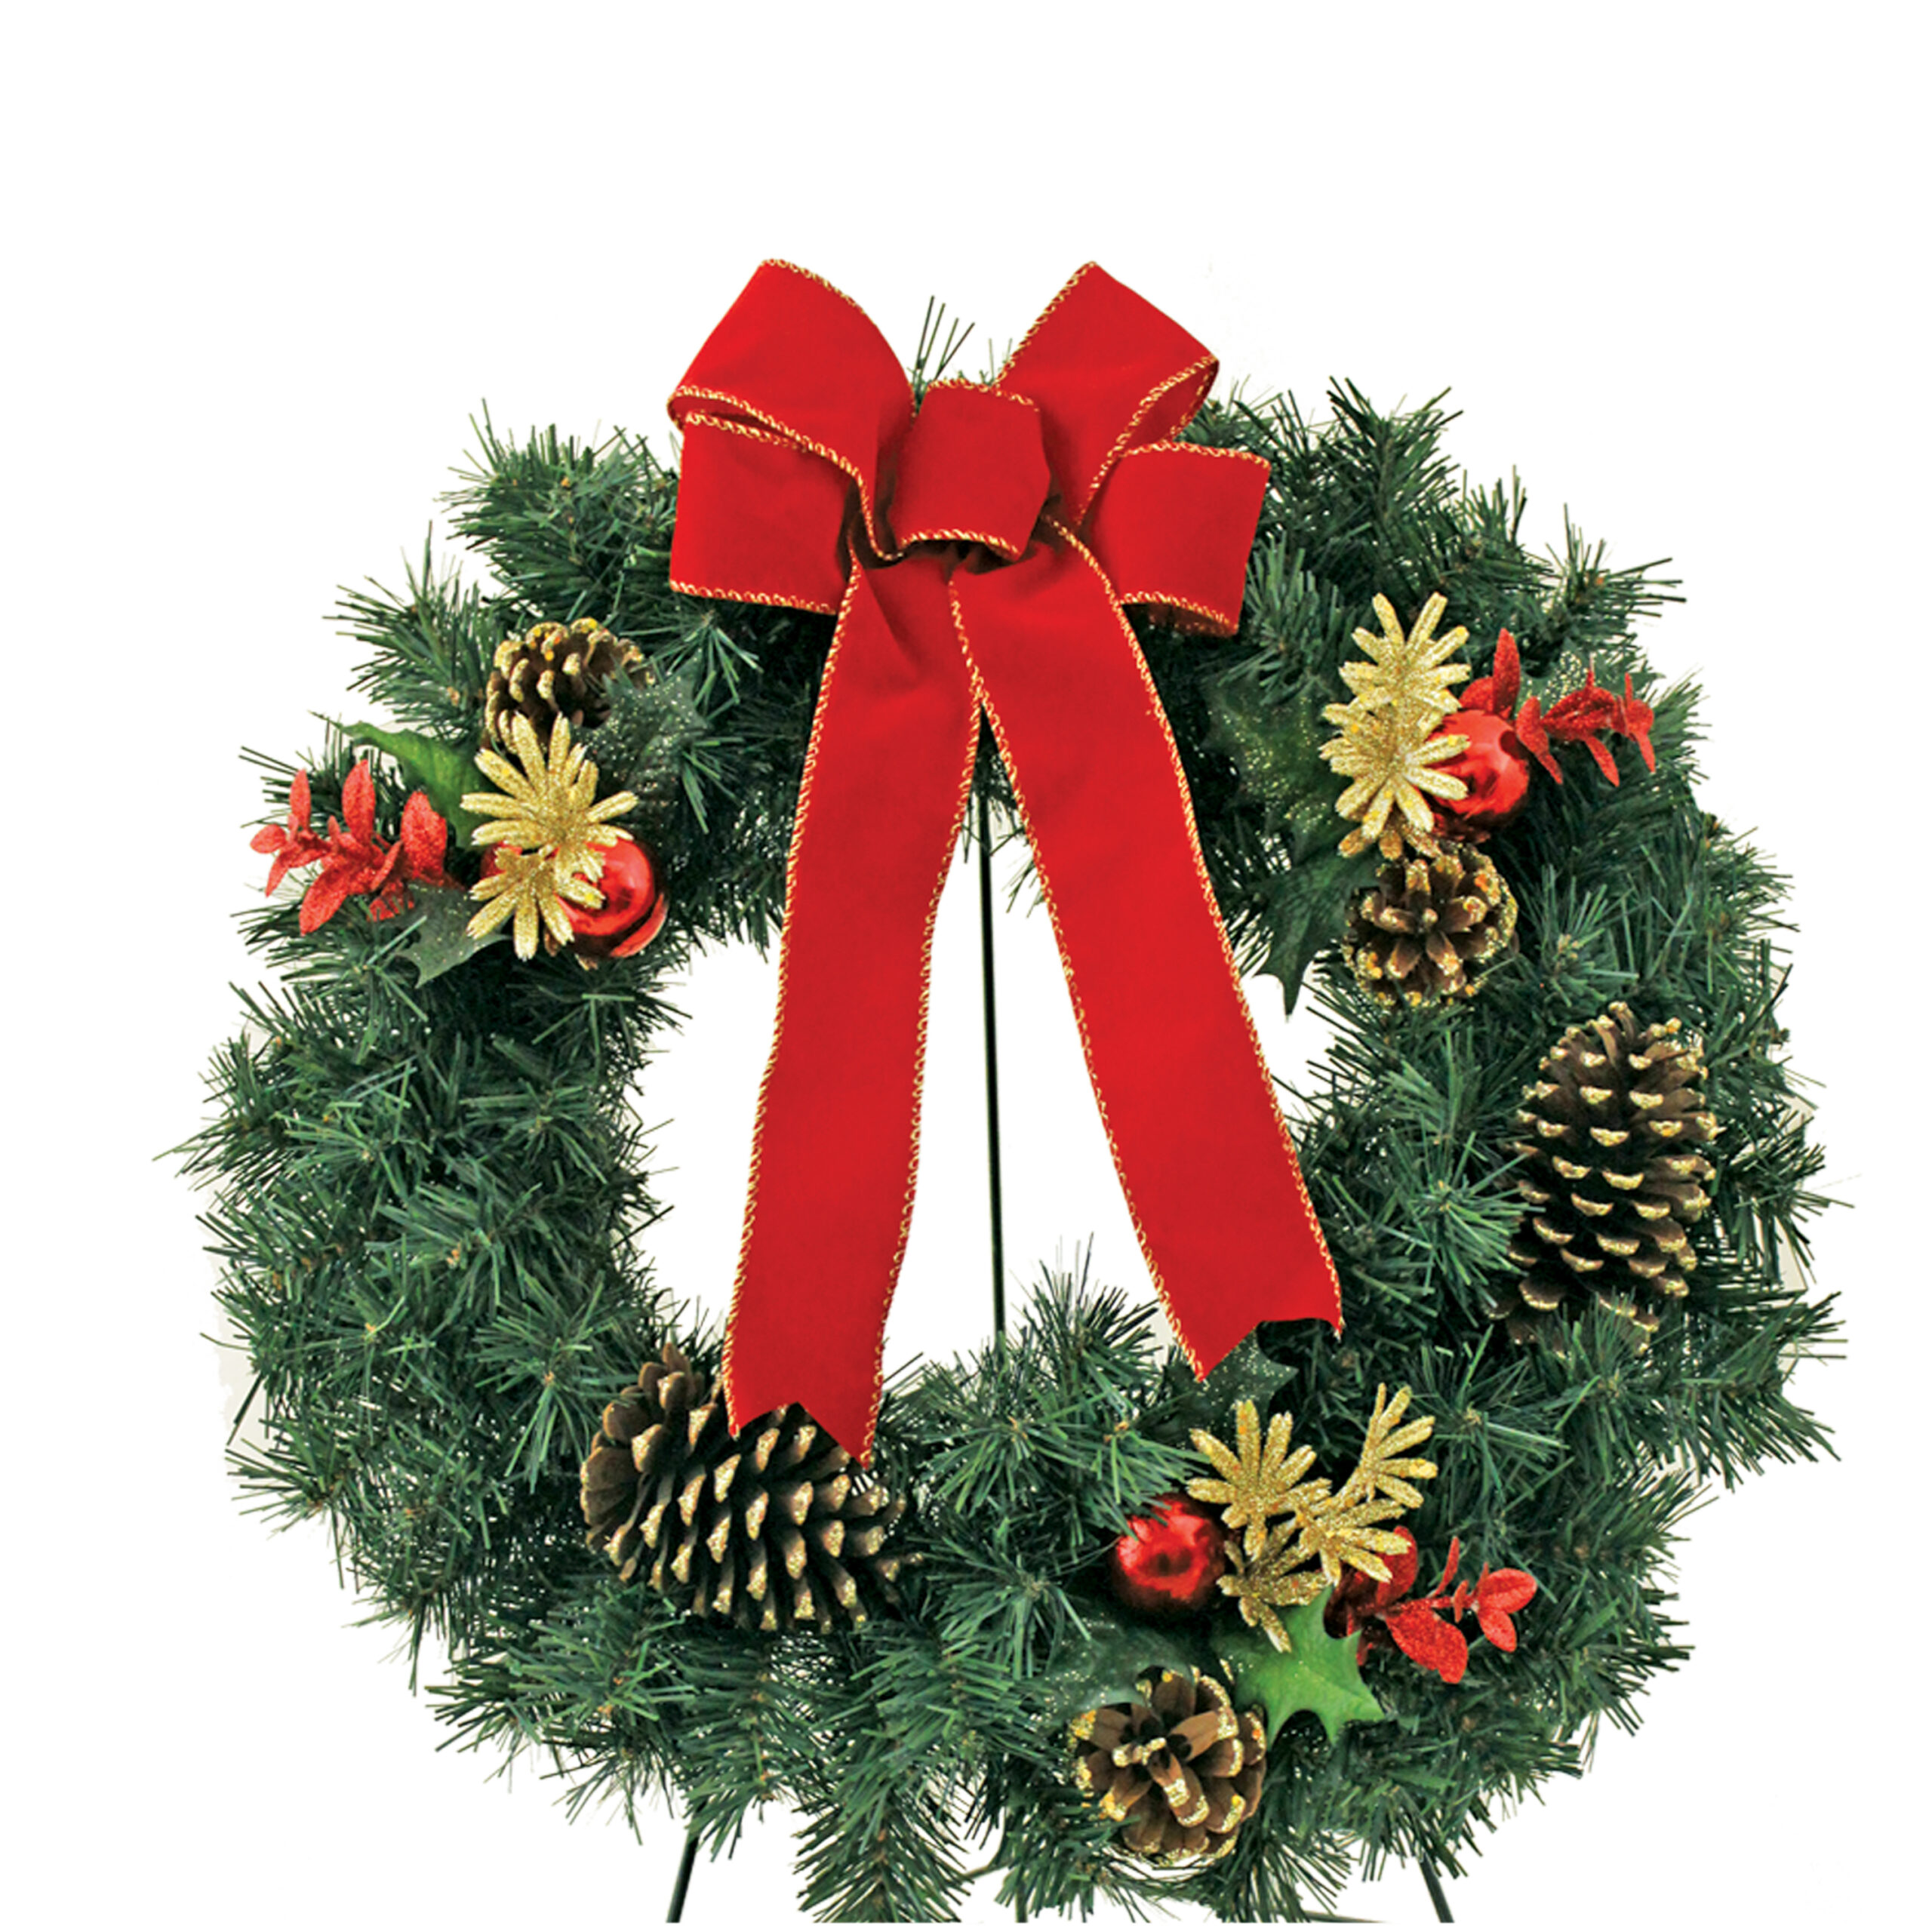 Christmas Wreath with Christmas Balls, Garnishment and Red Bow - Mt Calvary  Cemetery